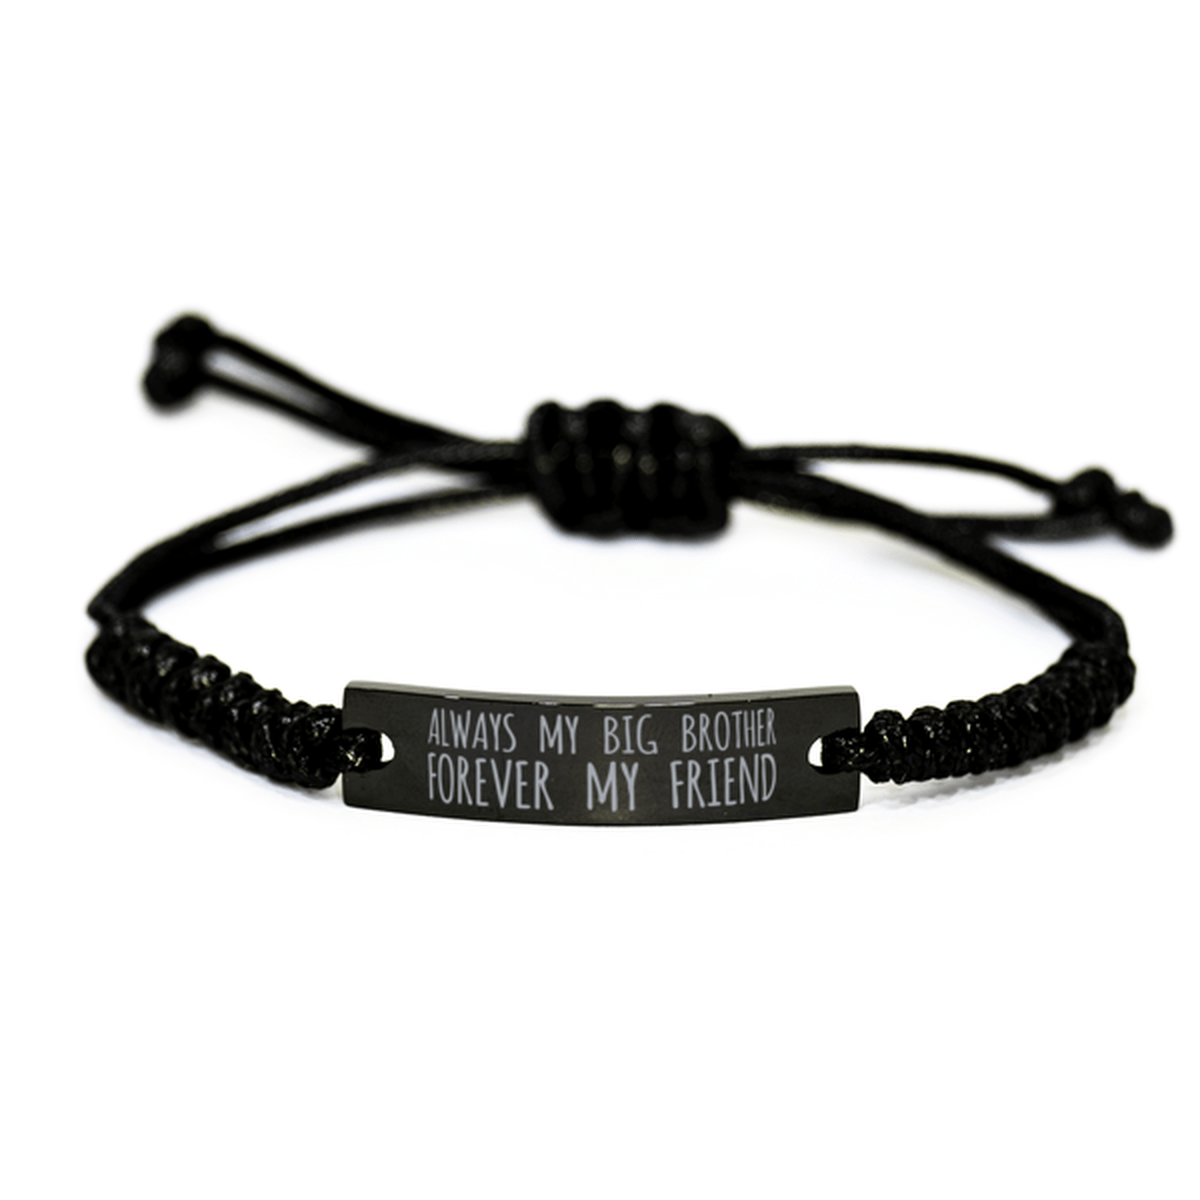 Inspirational Big Brother Black Rope Bracelet, Always My Big Brother Forever My Friend, Best Birthday Gifts For Family